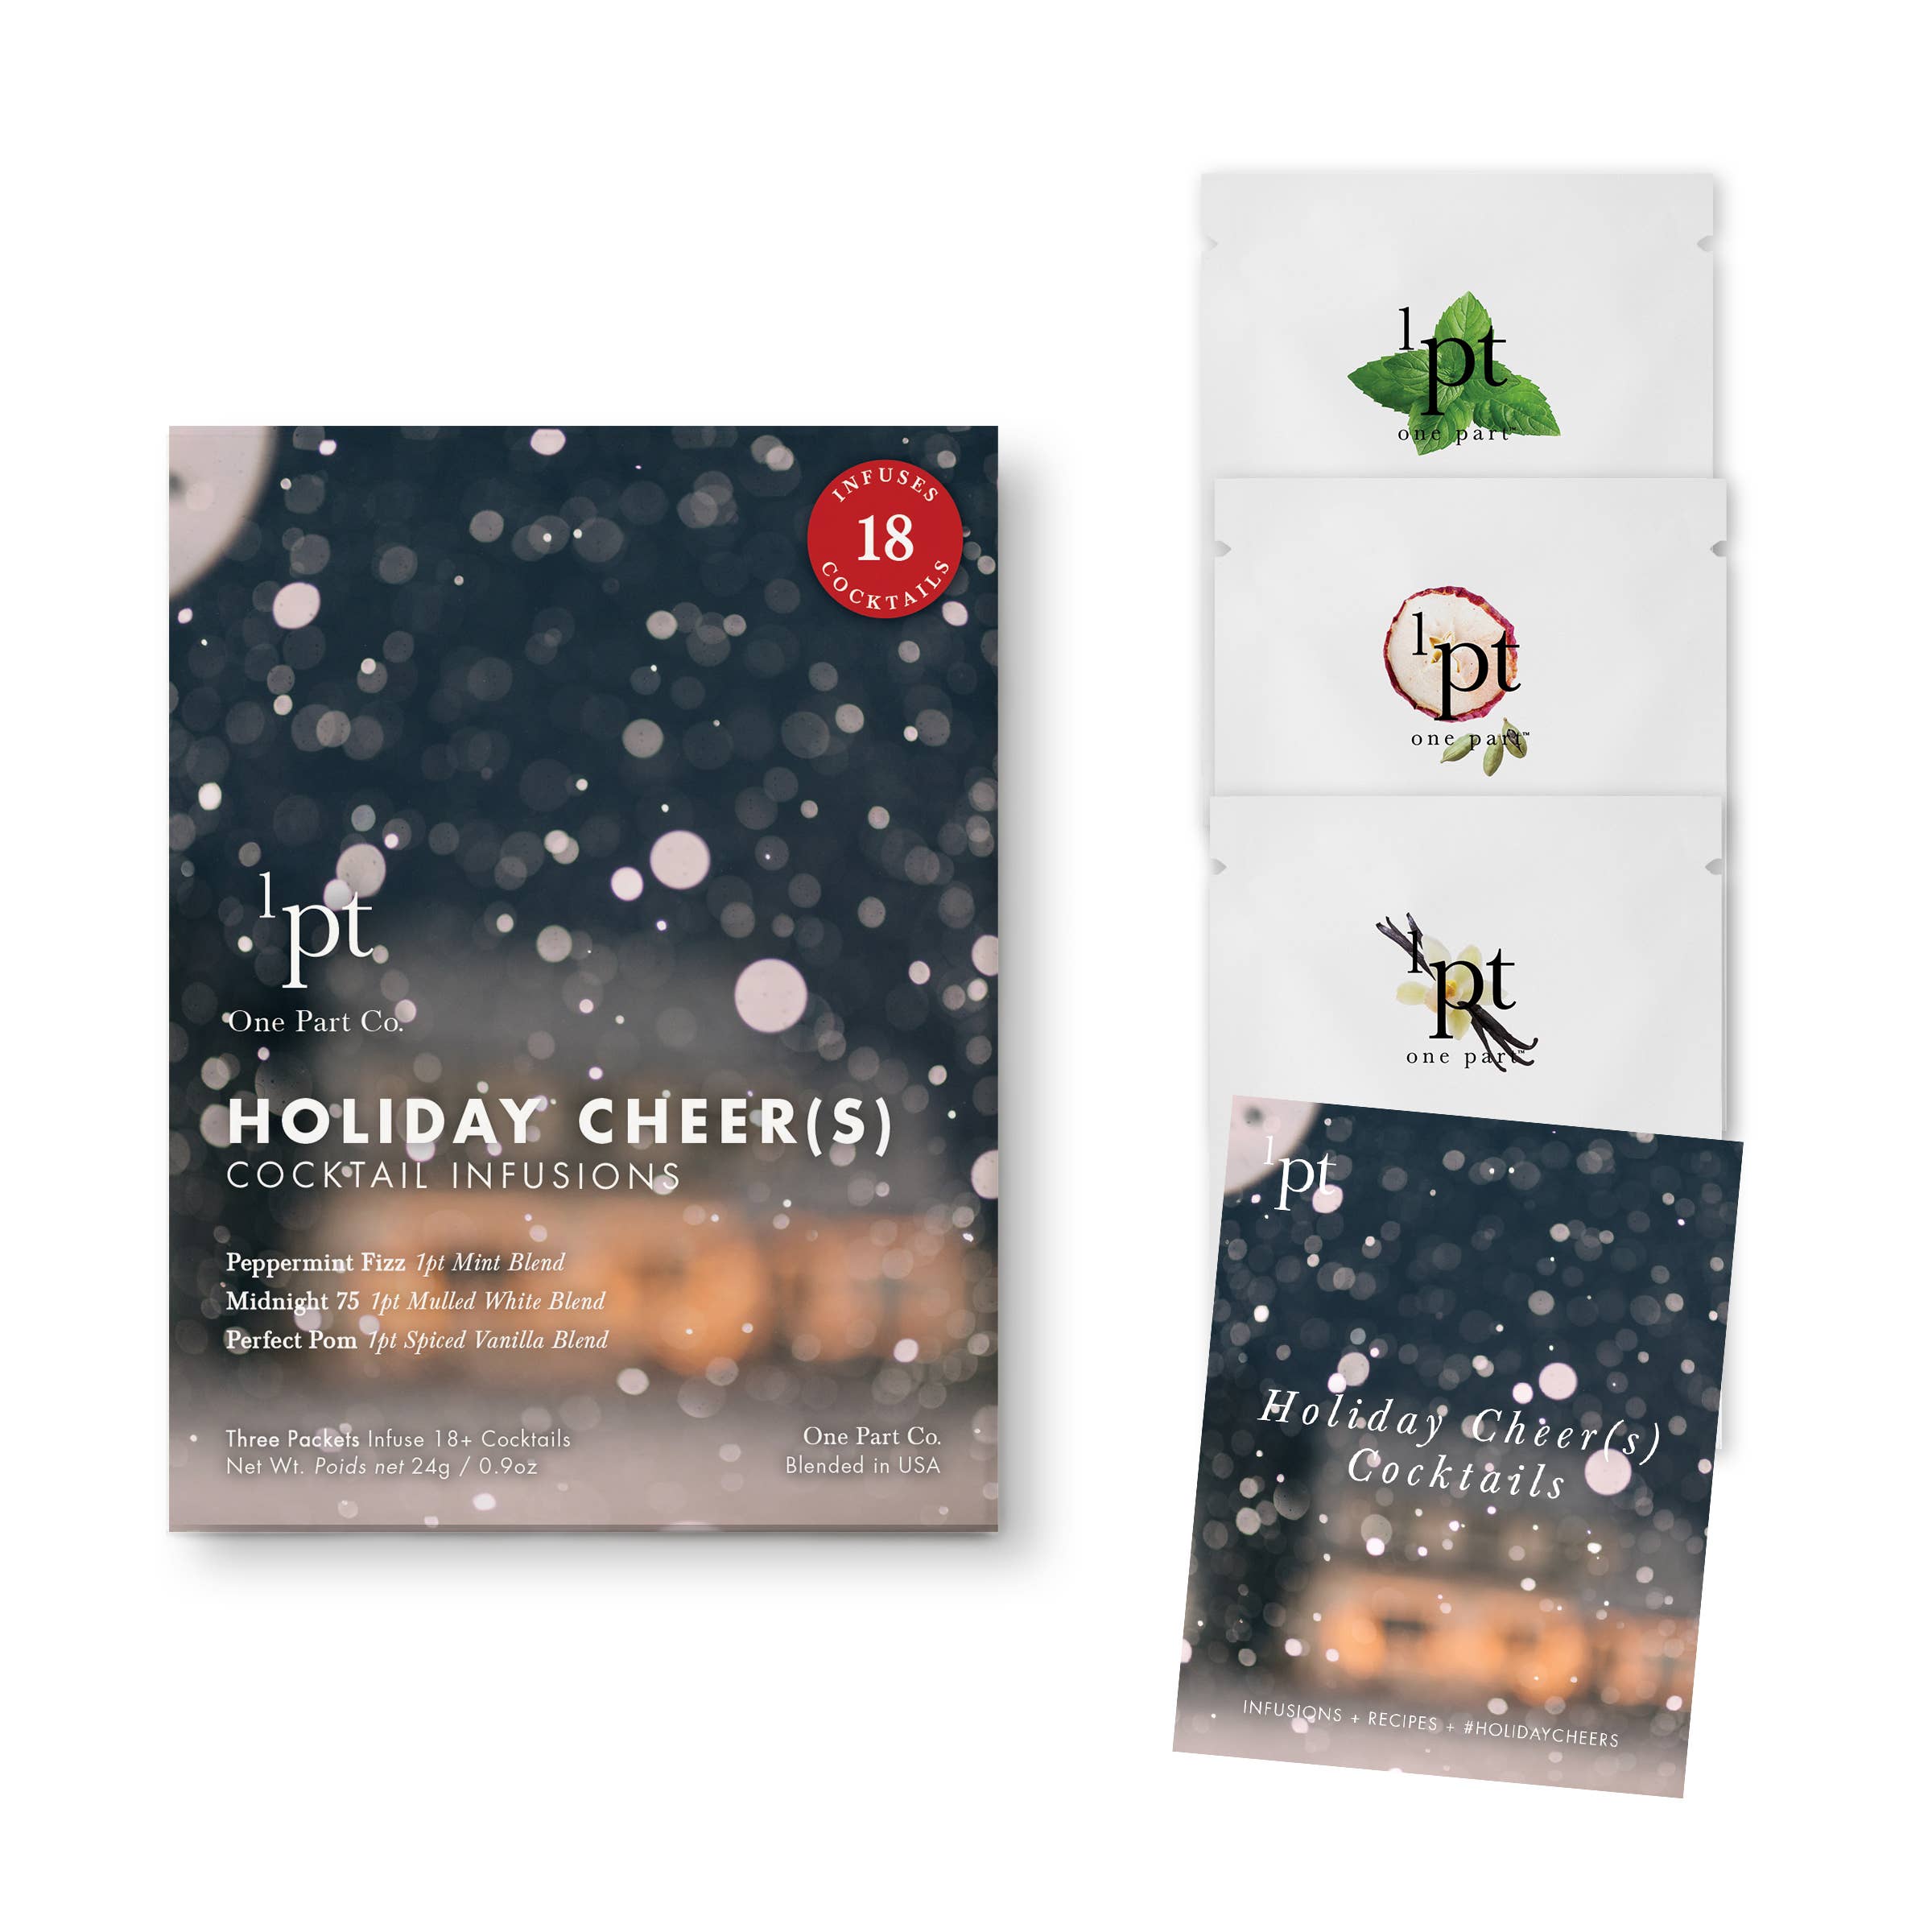 Holiday Cheer(s) Occasion Cocktail Infusion Pack